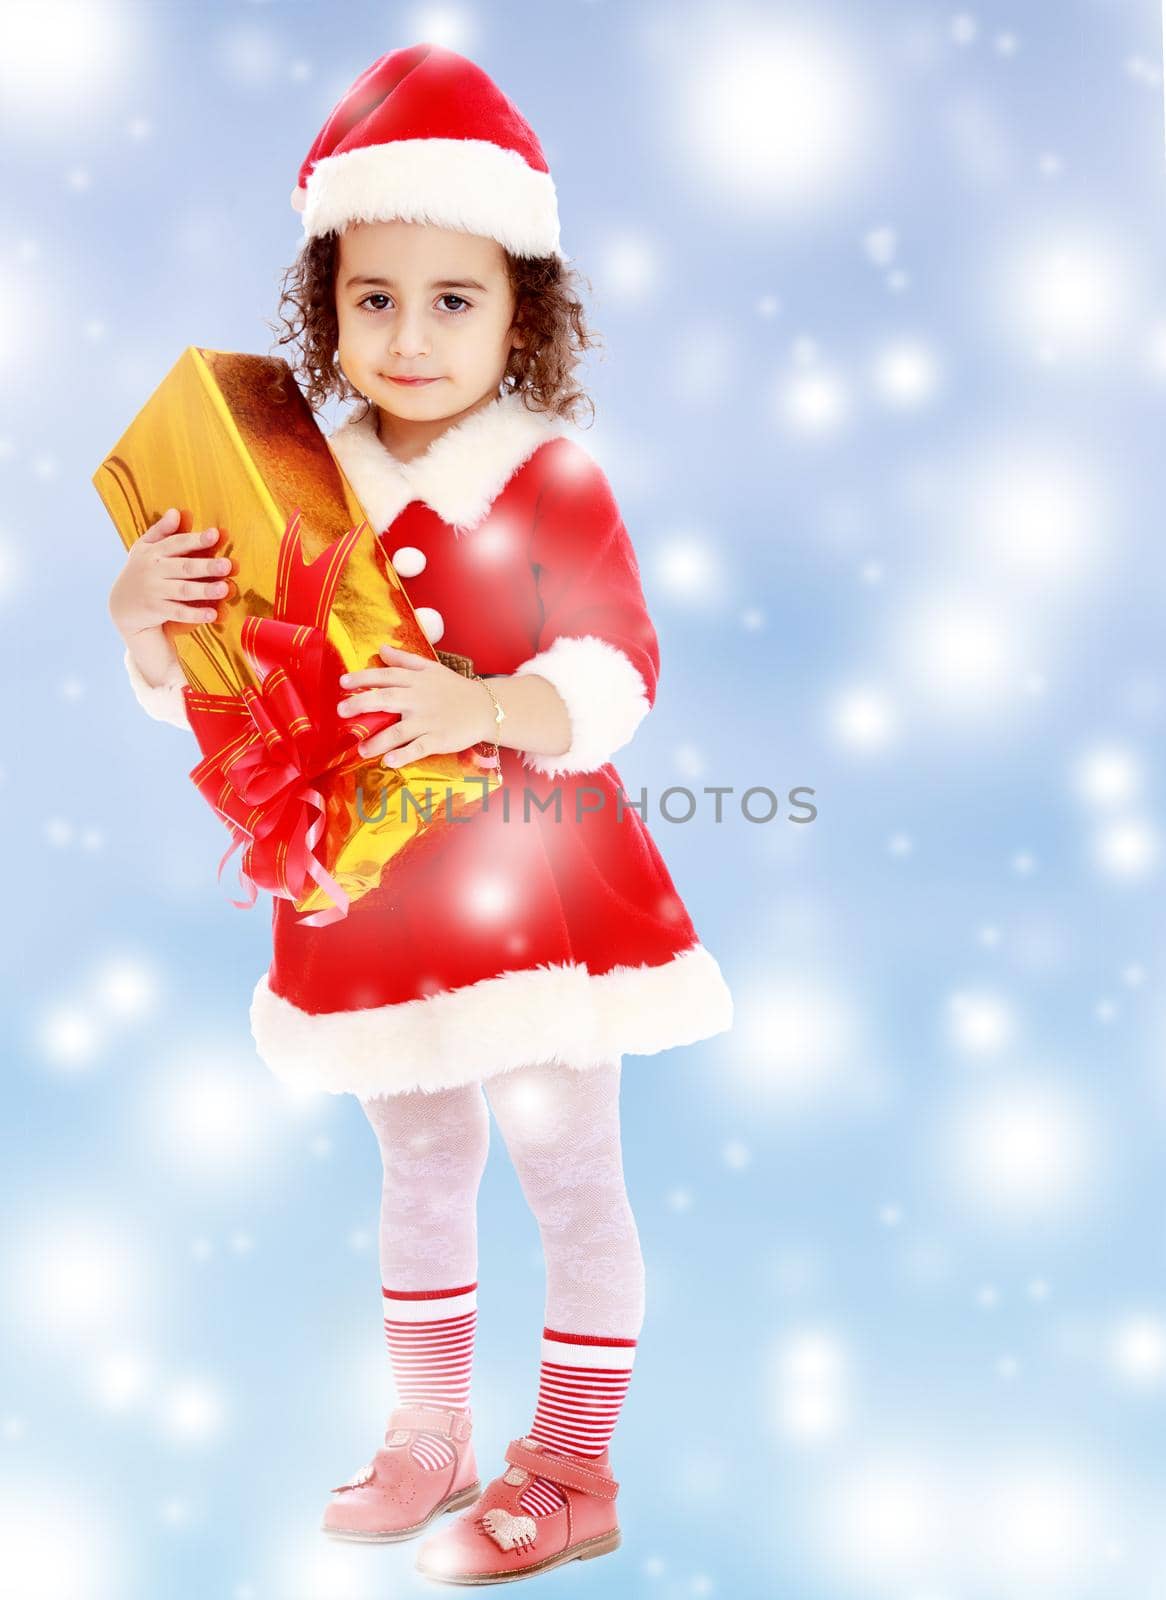 Cute little curly girl in a coat and hat of Santa Claus holding a box with a gift.Blue winter background with white snowflakes.